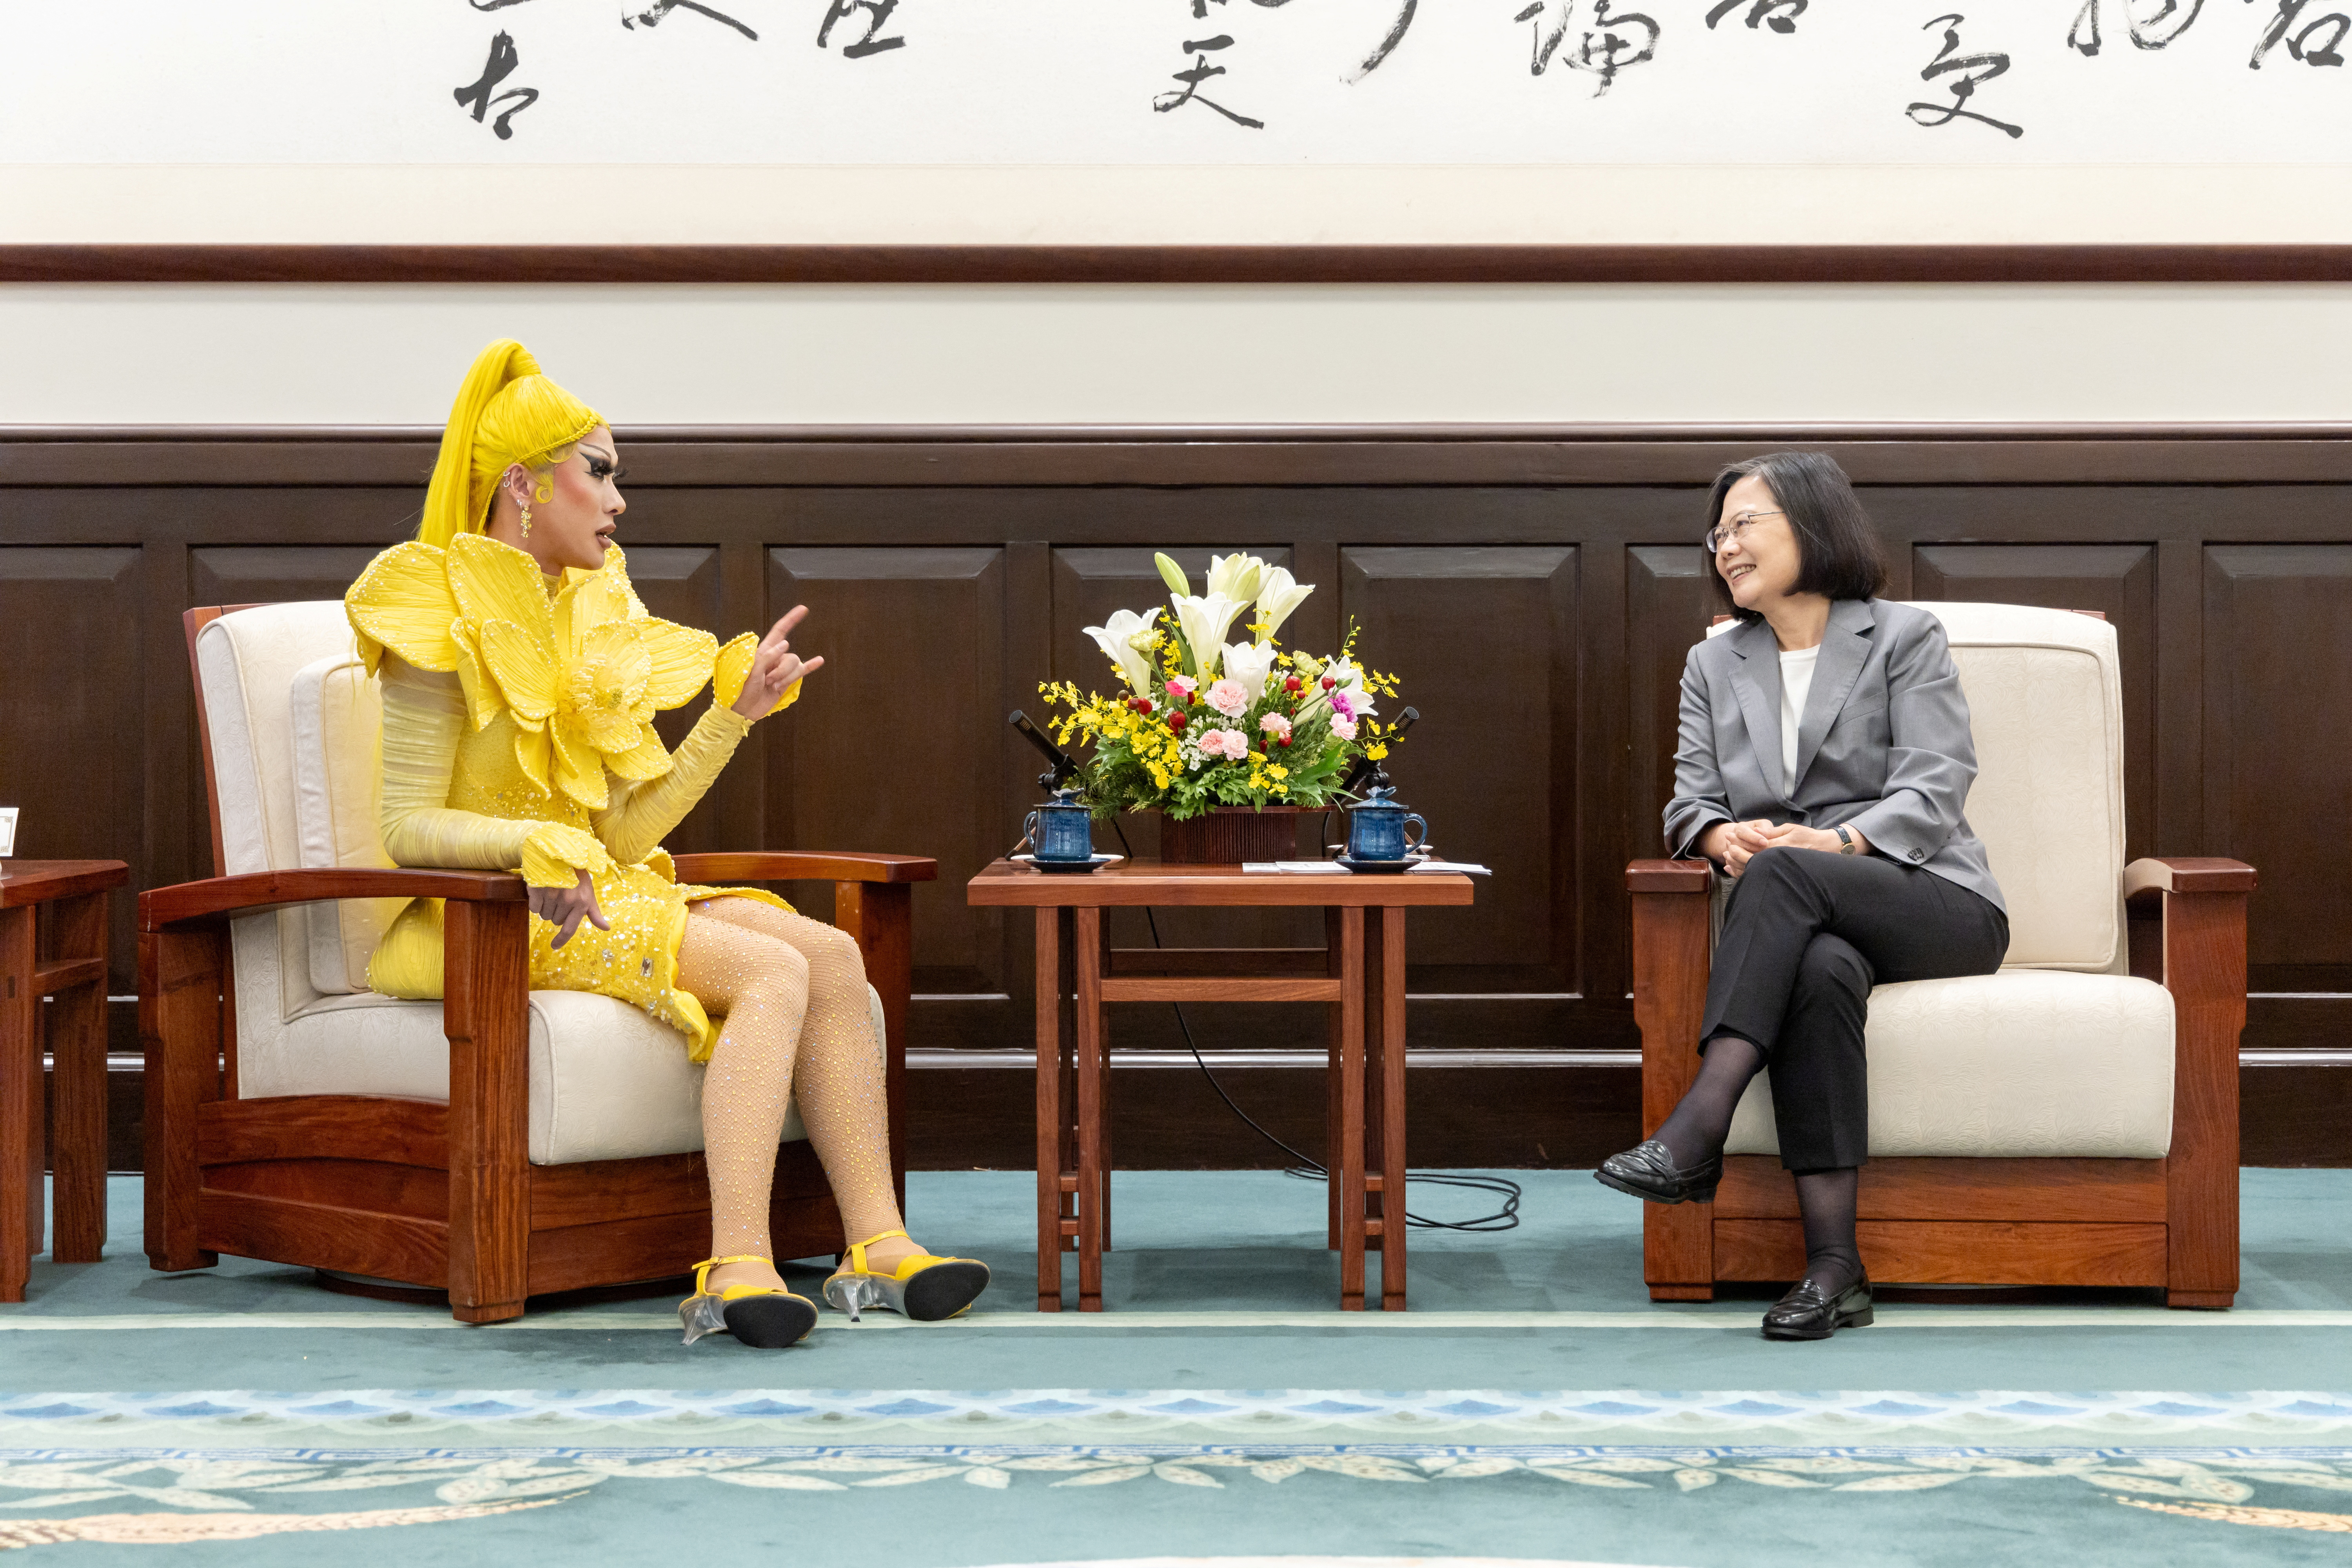 Taiwan's President Tsai meets with drag queen Nymphia Wind at presidential office in Taipei